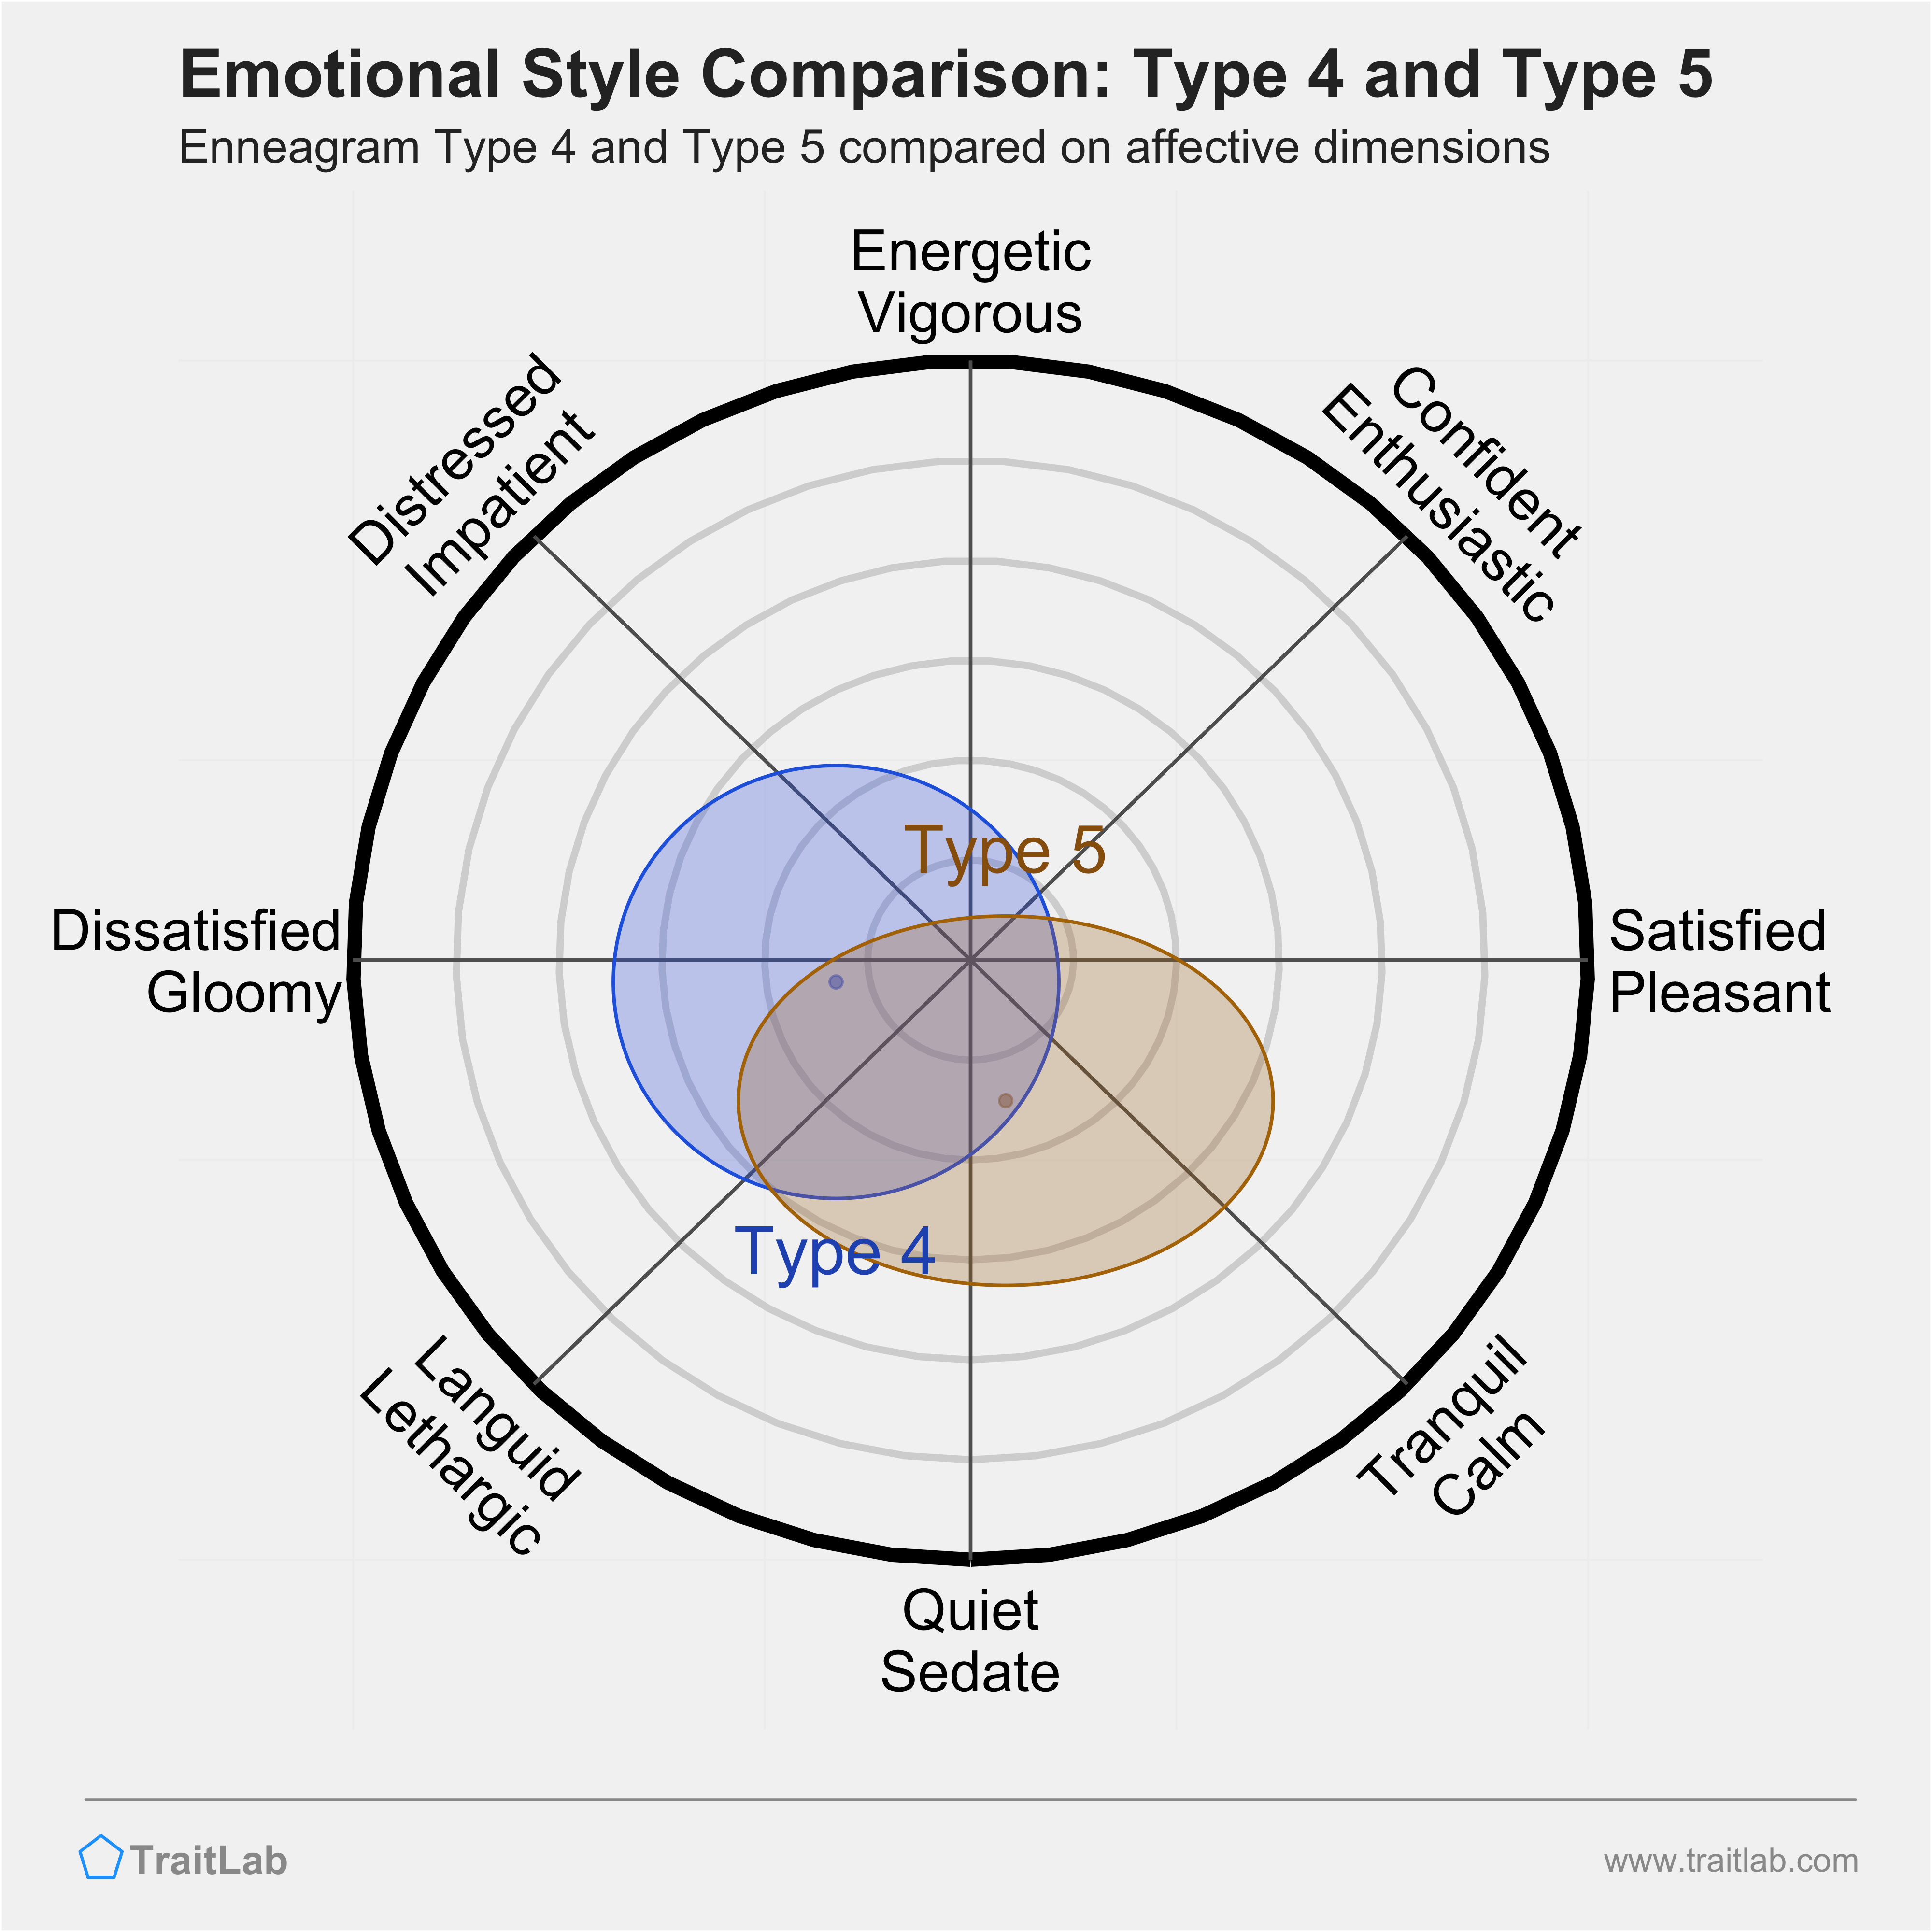 Type 4 and Type 5 comparison across emotional (affective) dimensions